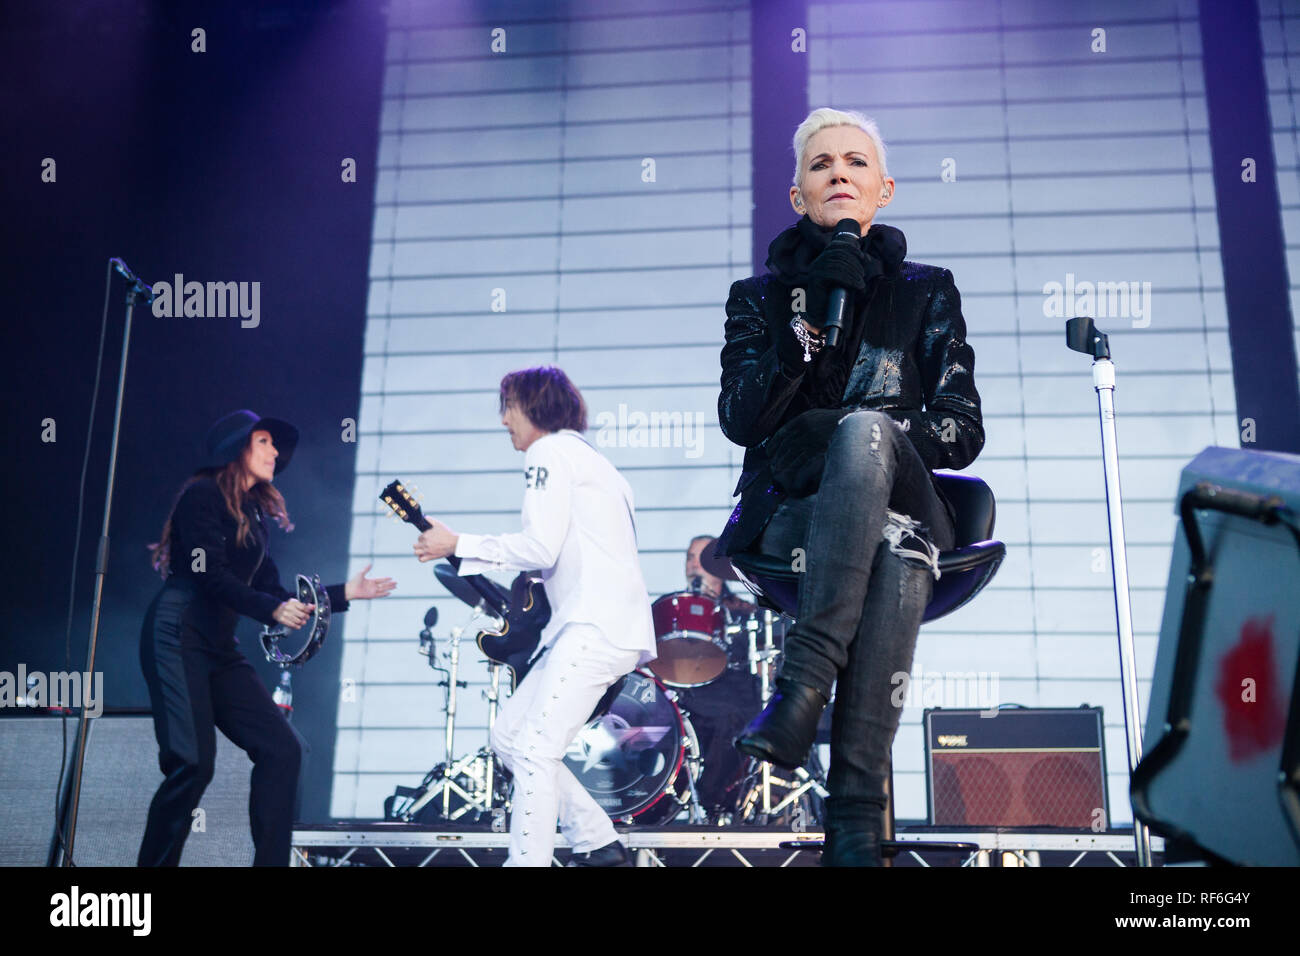 The Swedish pop rock duo Roxette performs a live concert at the Danish music festival Jelling Festival 2015. The duo consists of singer Marie Fredriksson (front) and musician Per Gessle (back). Denmark, 23/05 2015. Stock Photo